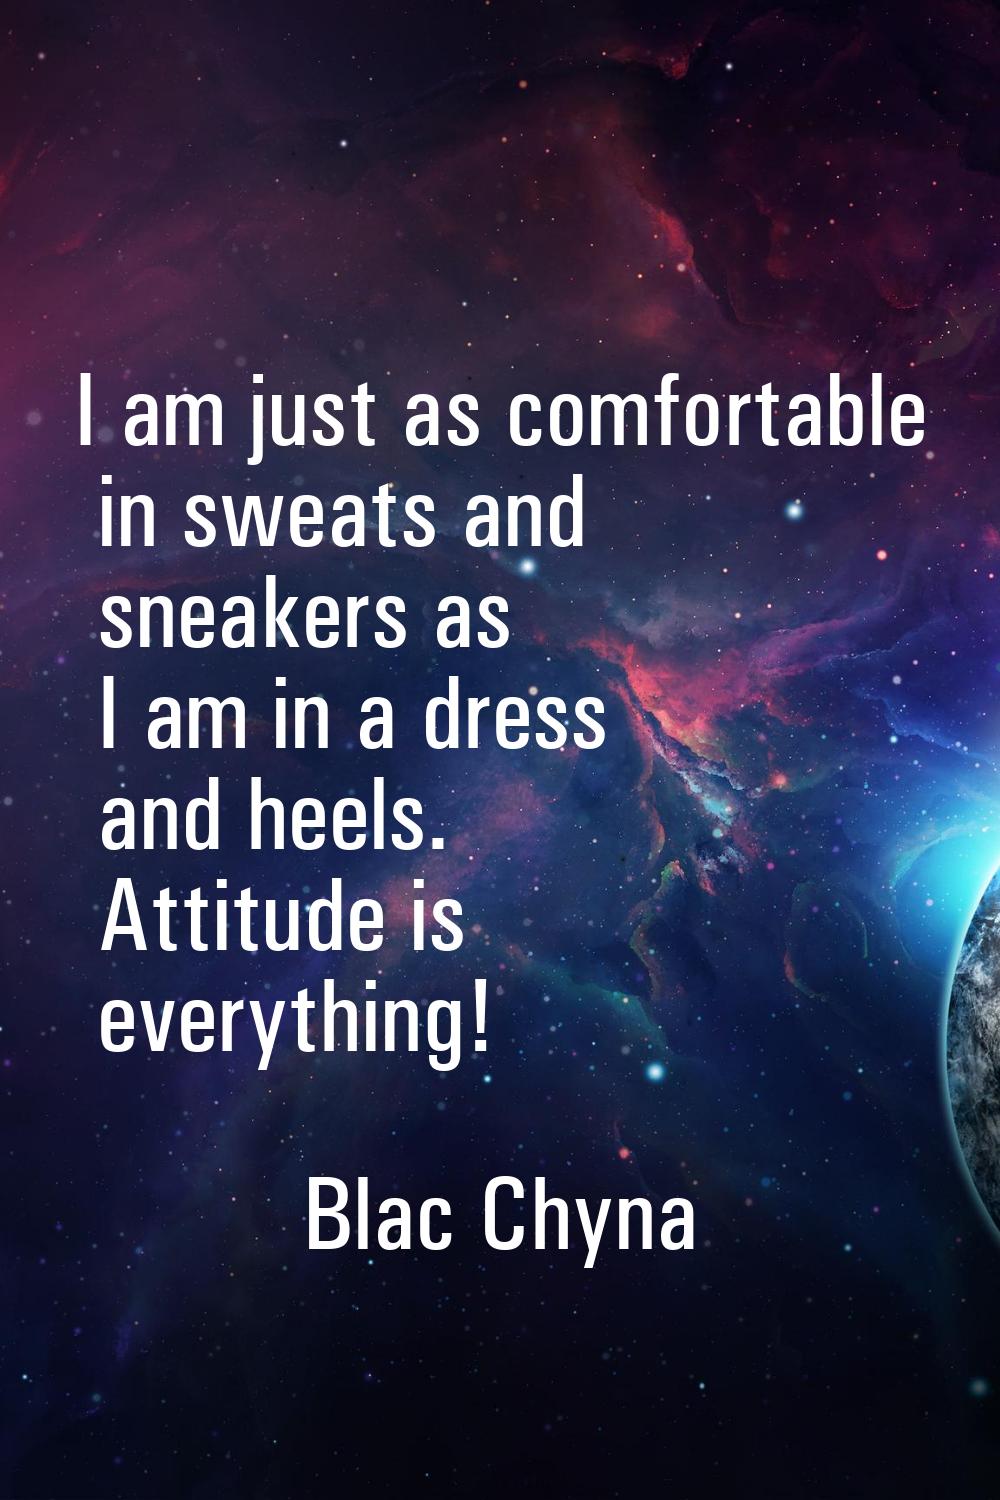 I am just as comfortable in sweats and sneakers as I am in a dress and heels. Attitude is everythin